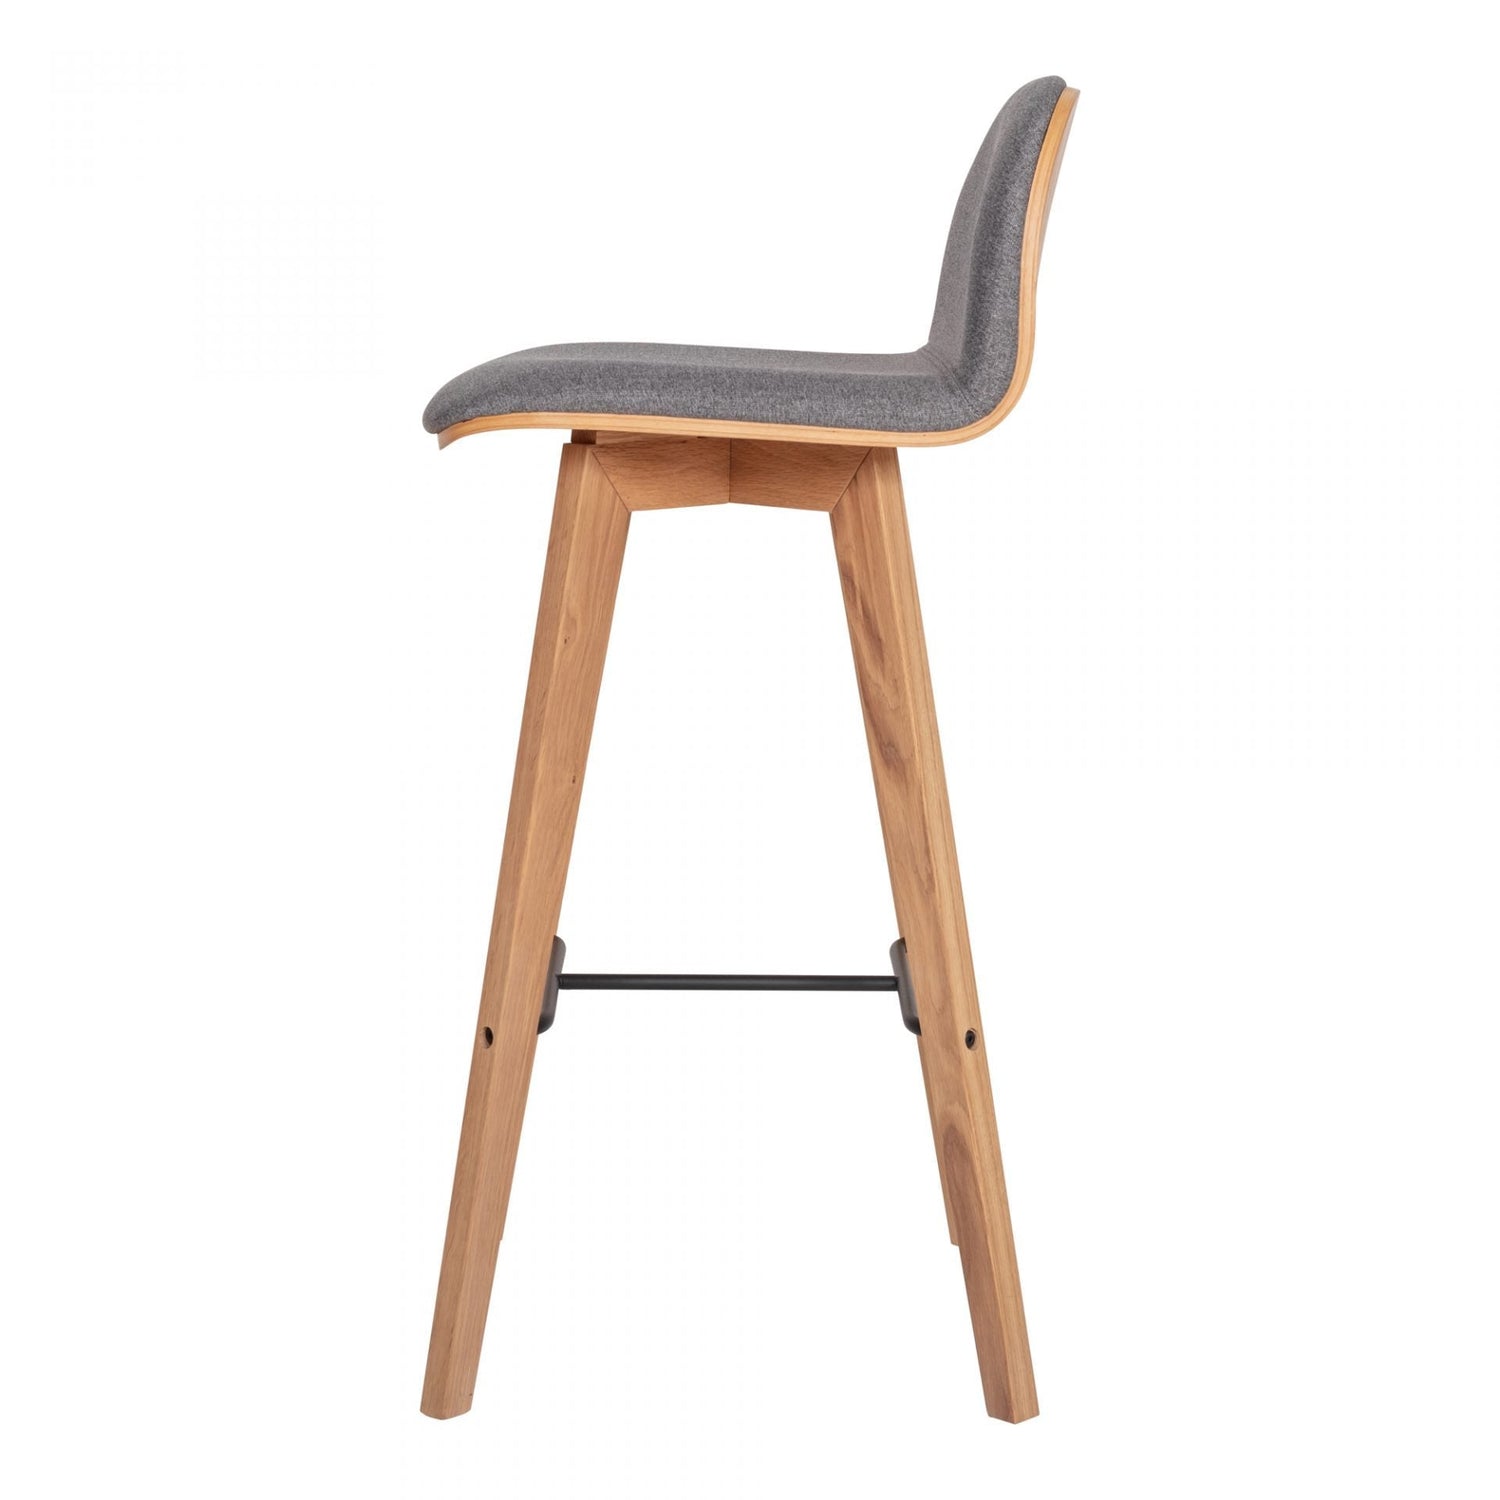 Barstool: Elevated Seating with Style